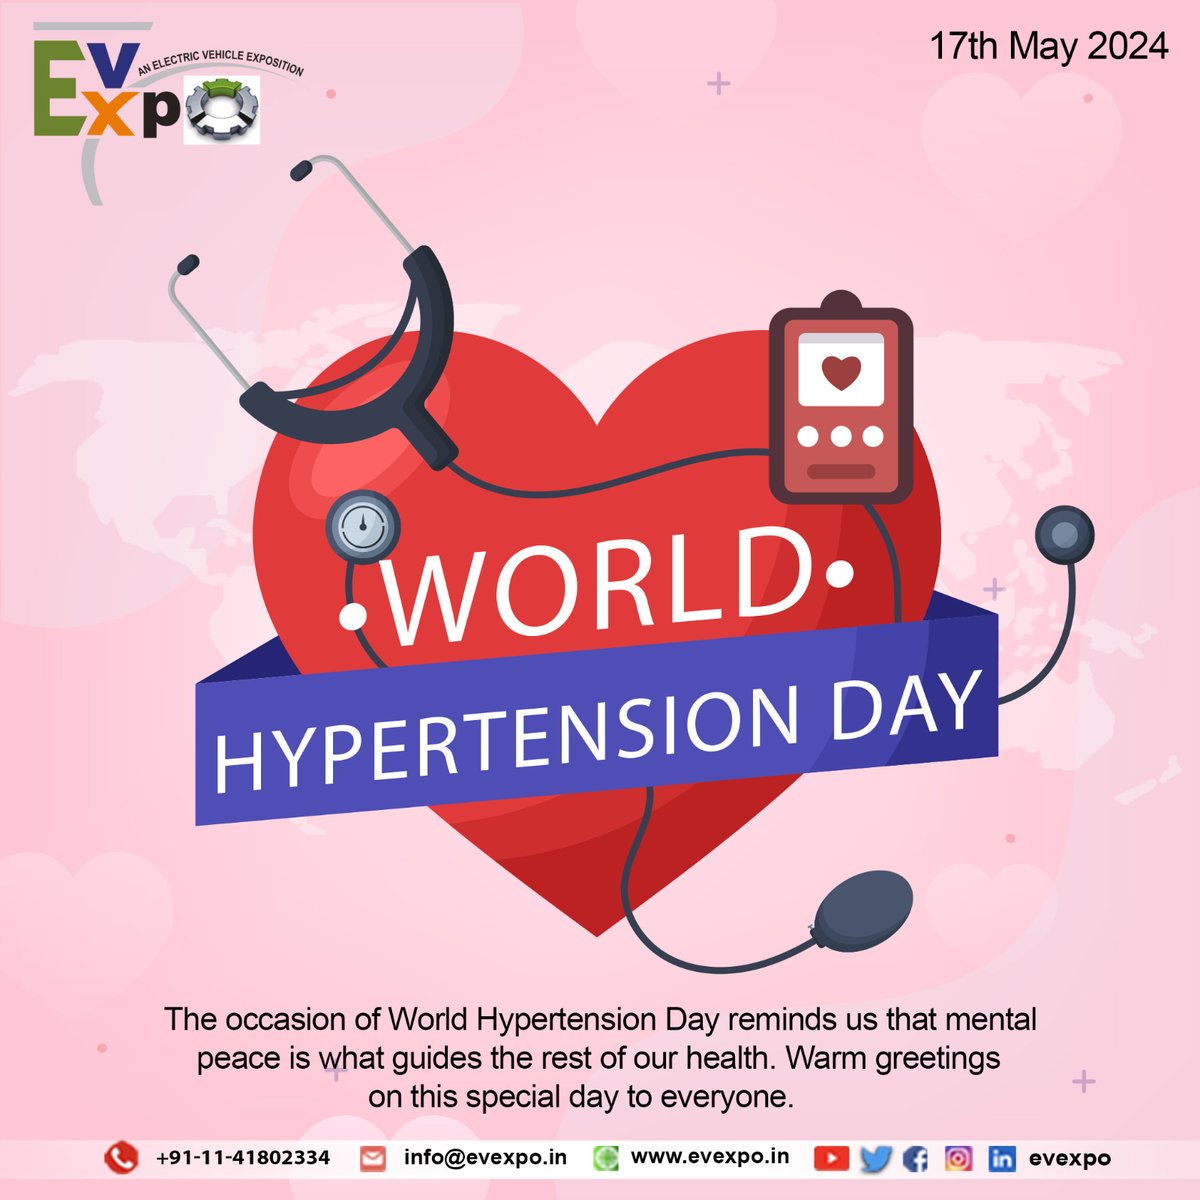 Happy World Hypertension Day from EvExpo! 🌍 Let's raise awareness about hypertension and the importance of regular blood pressure checks. Maintaining a healthy lifestyle is key—exercise regularly, eat a balanced diet, and manage stress. #hypertensionday #HealthyHeart #heart